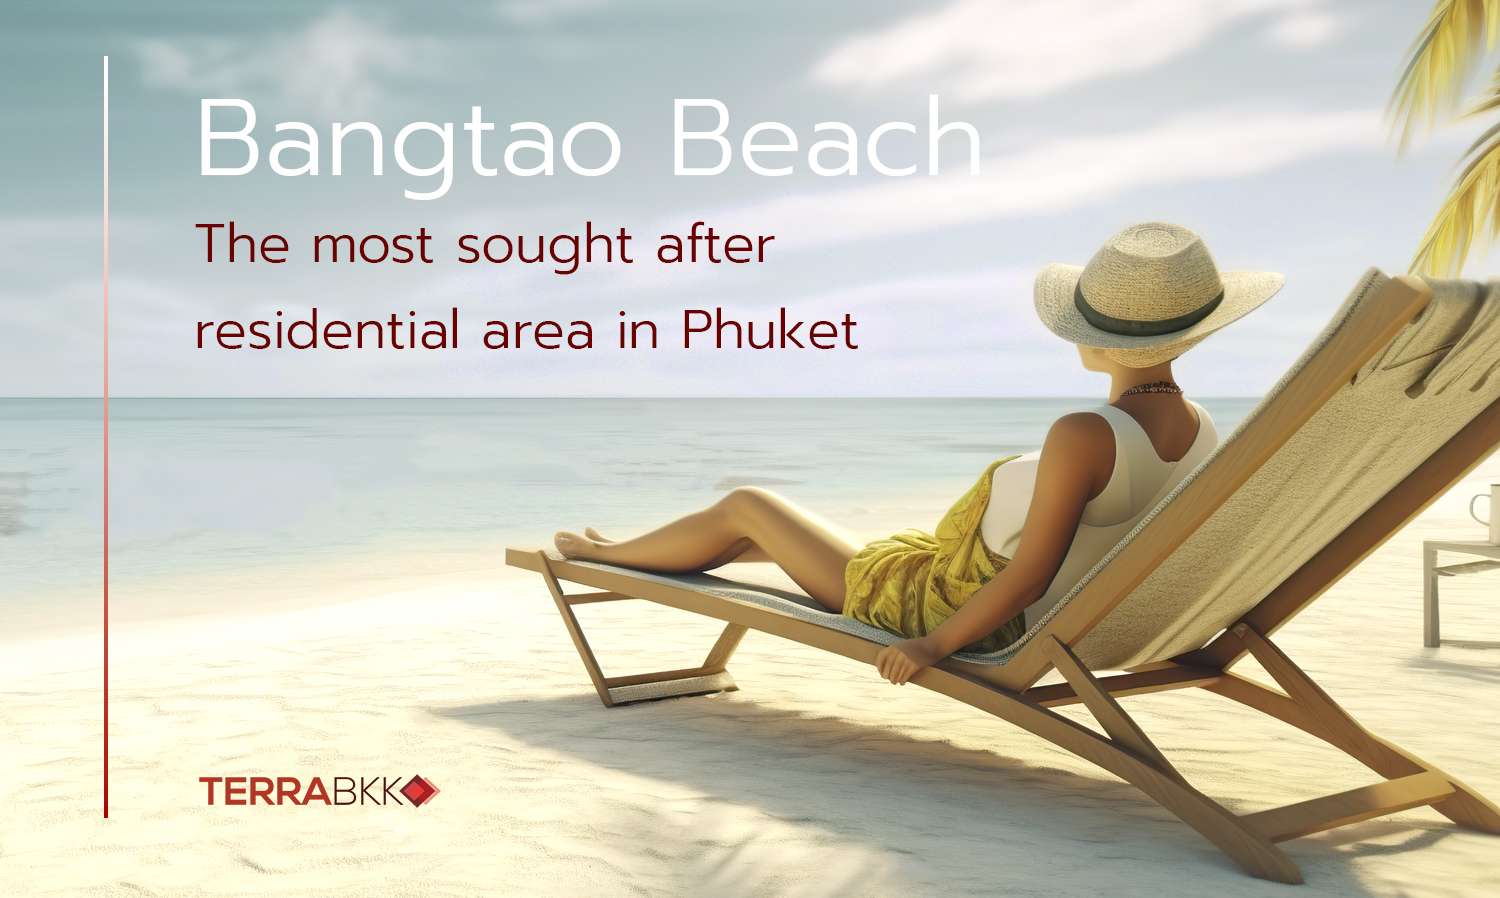 “Bangtao”, The most sought after residential area in Phuket